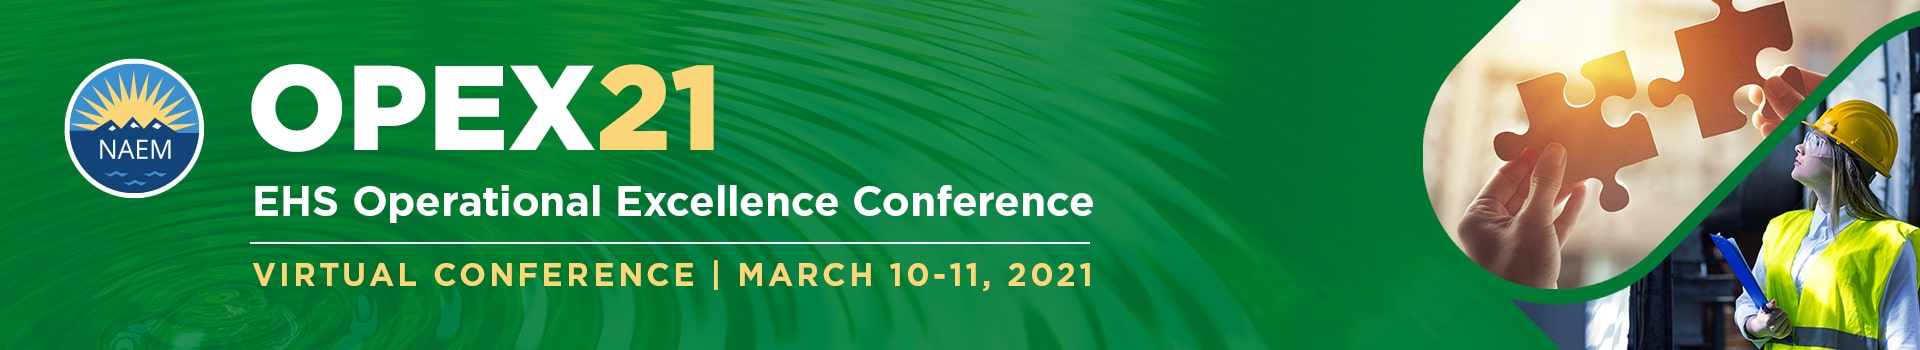 OPEX21 | EHS Operational Excellence Conference - March 10 - March 11, 2021 - Virtual Event, Join From Anywhere!